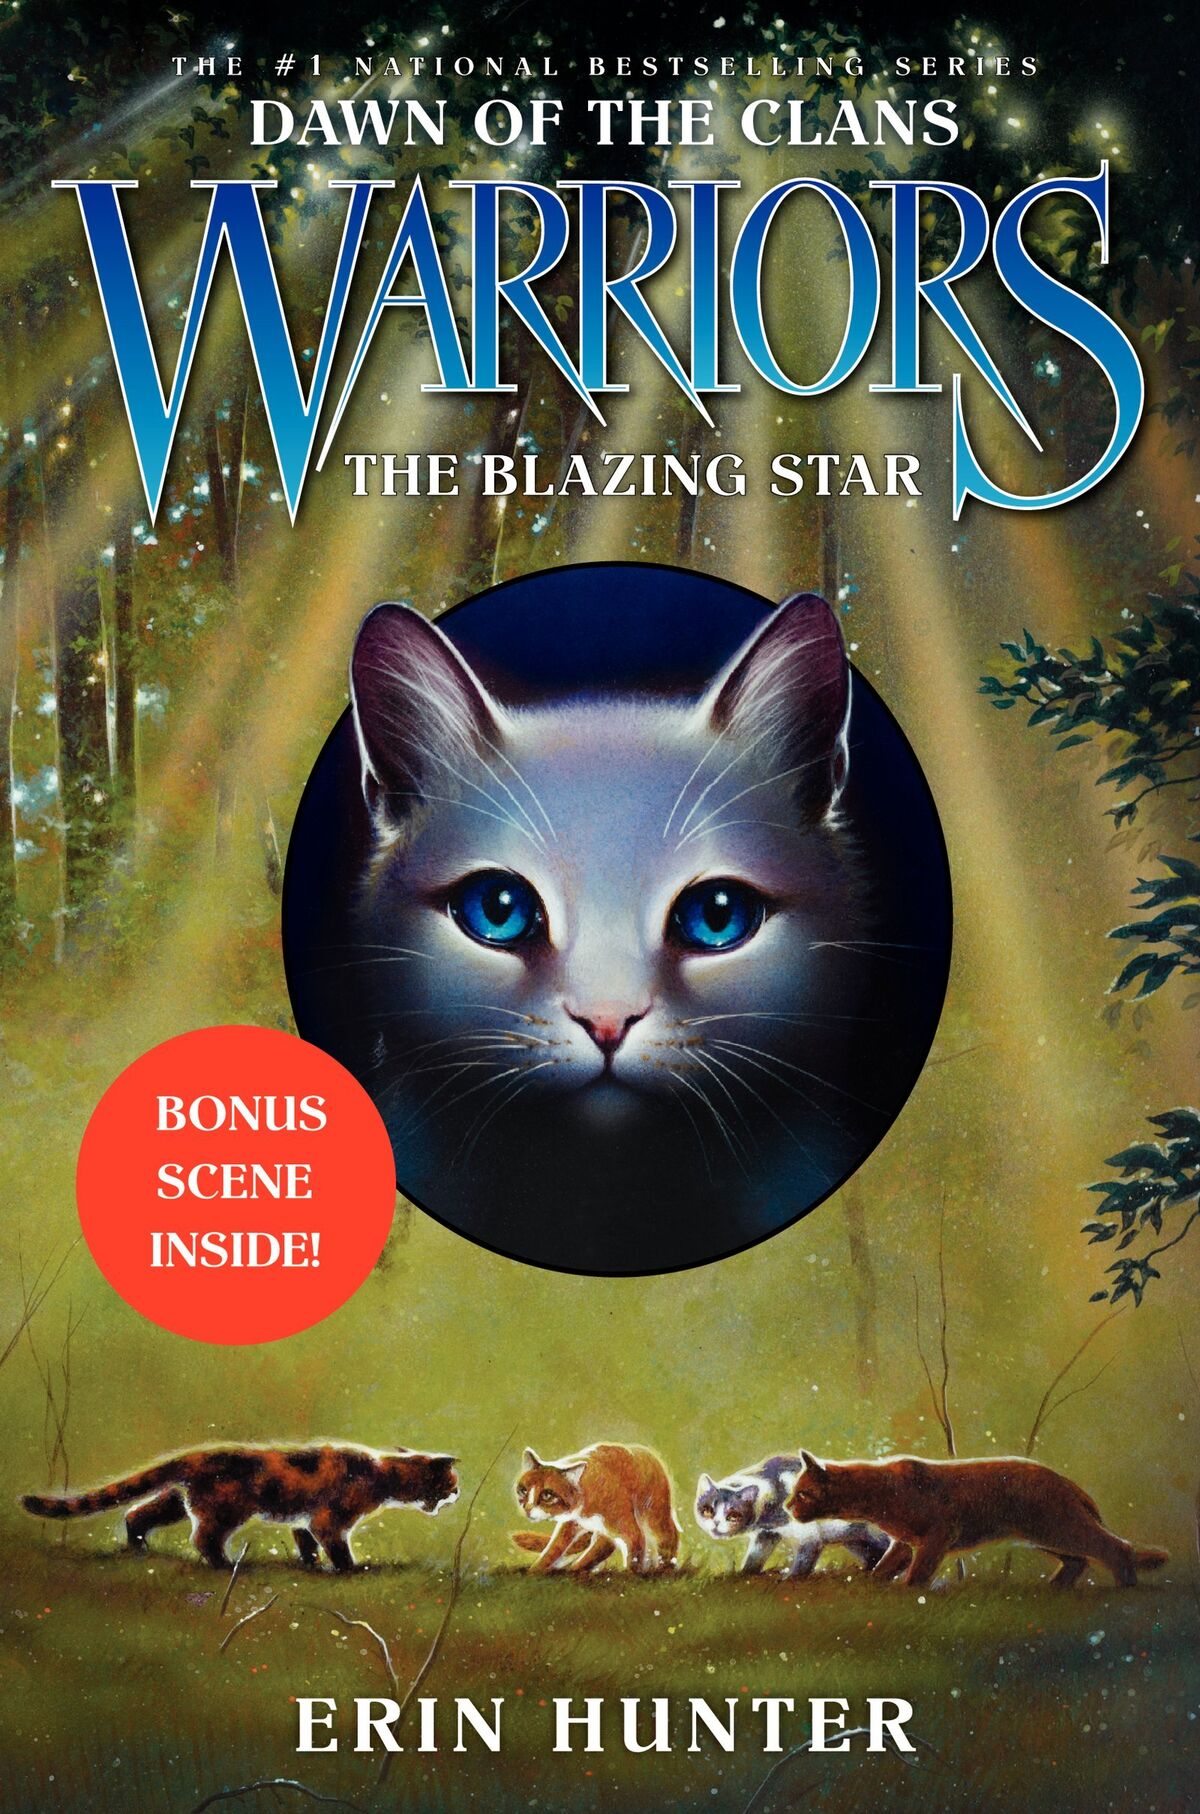 Warriors Cats (My) Reading Order, Sno-Isle Libraries